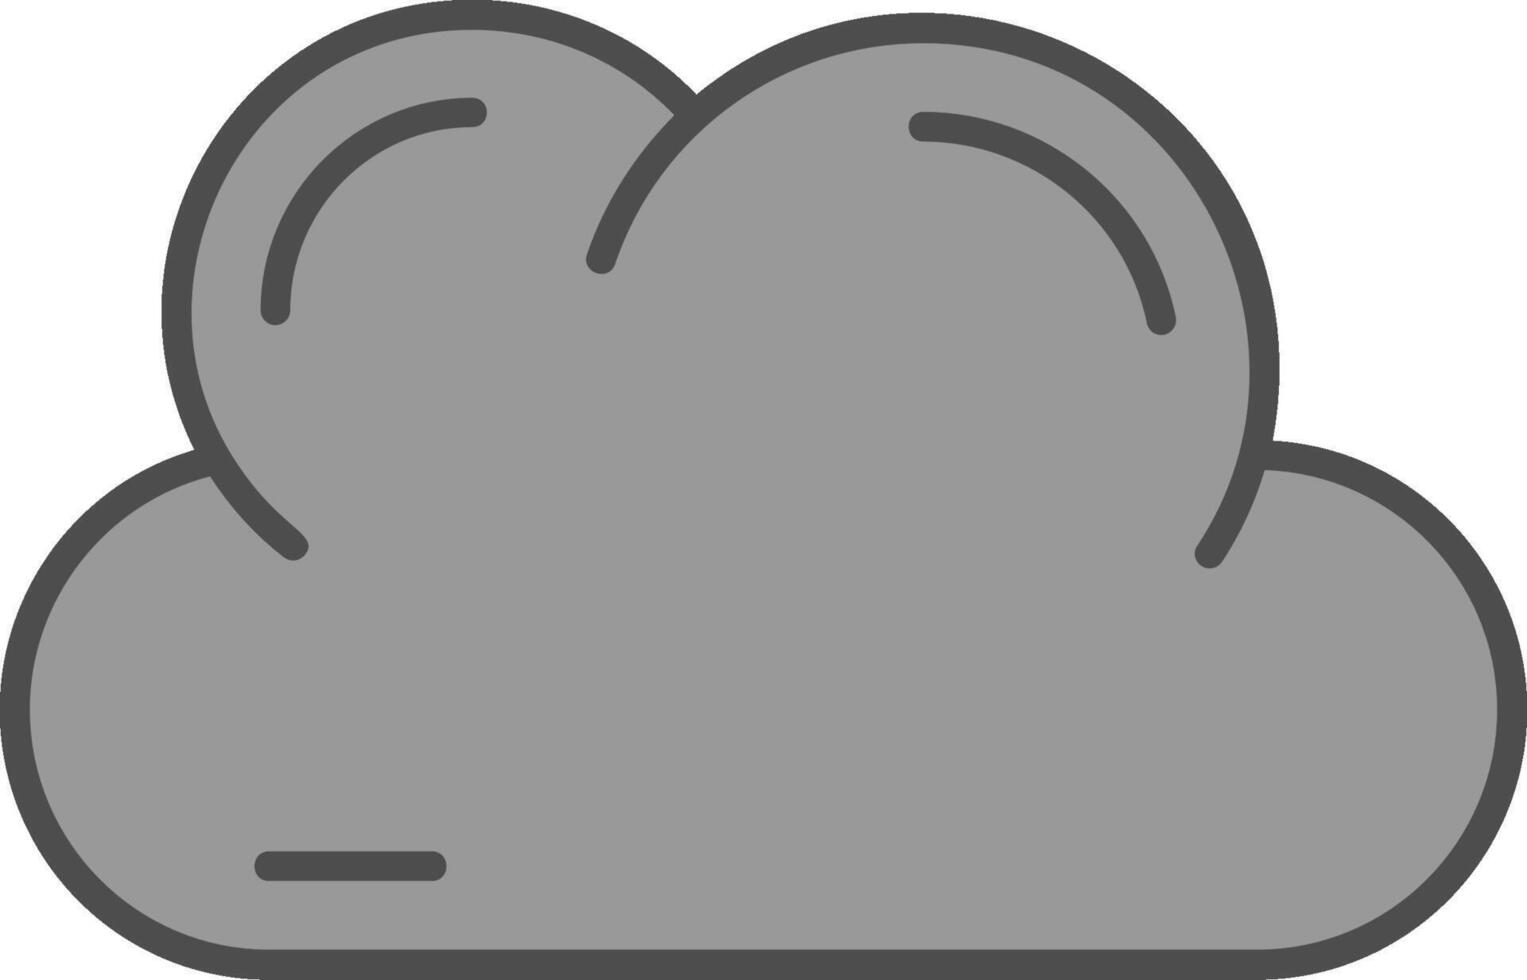 Cloud Line Filled Greyscale Icon vector